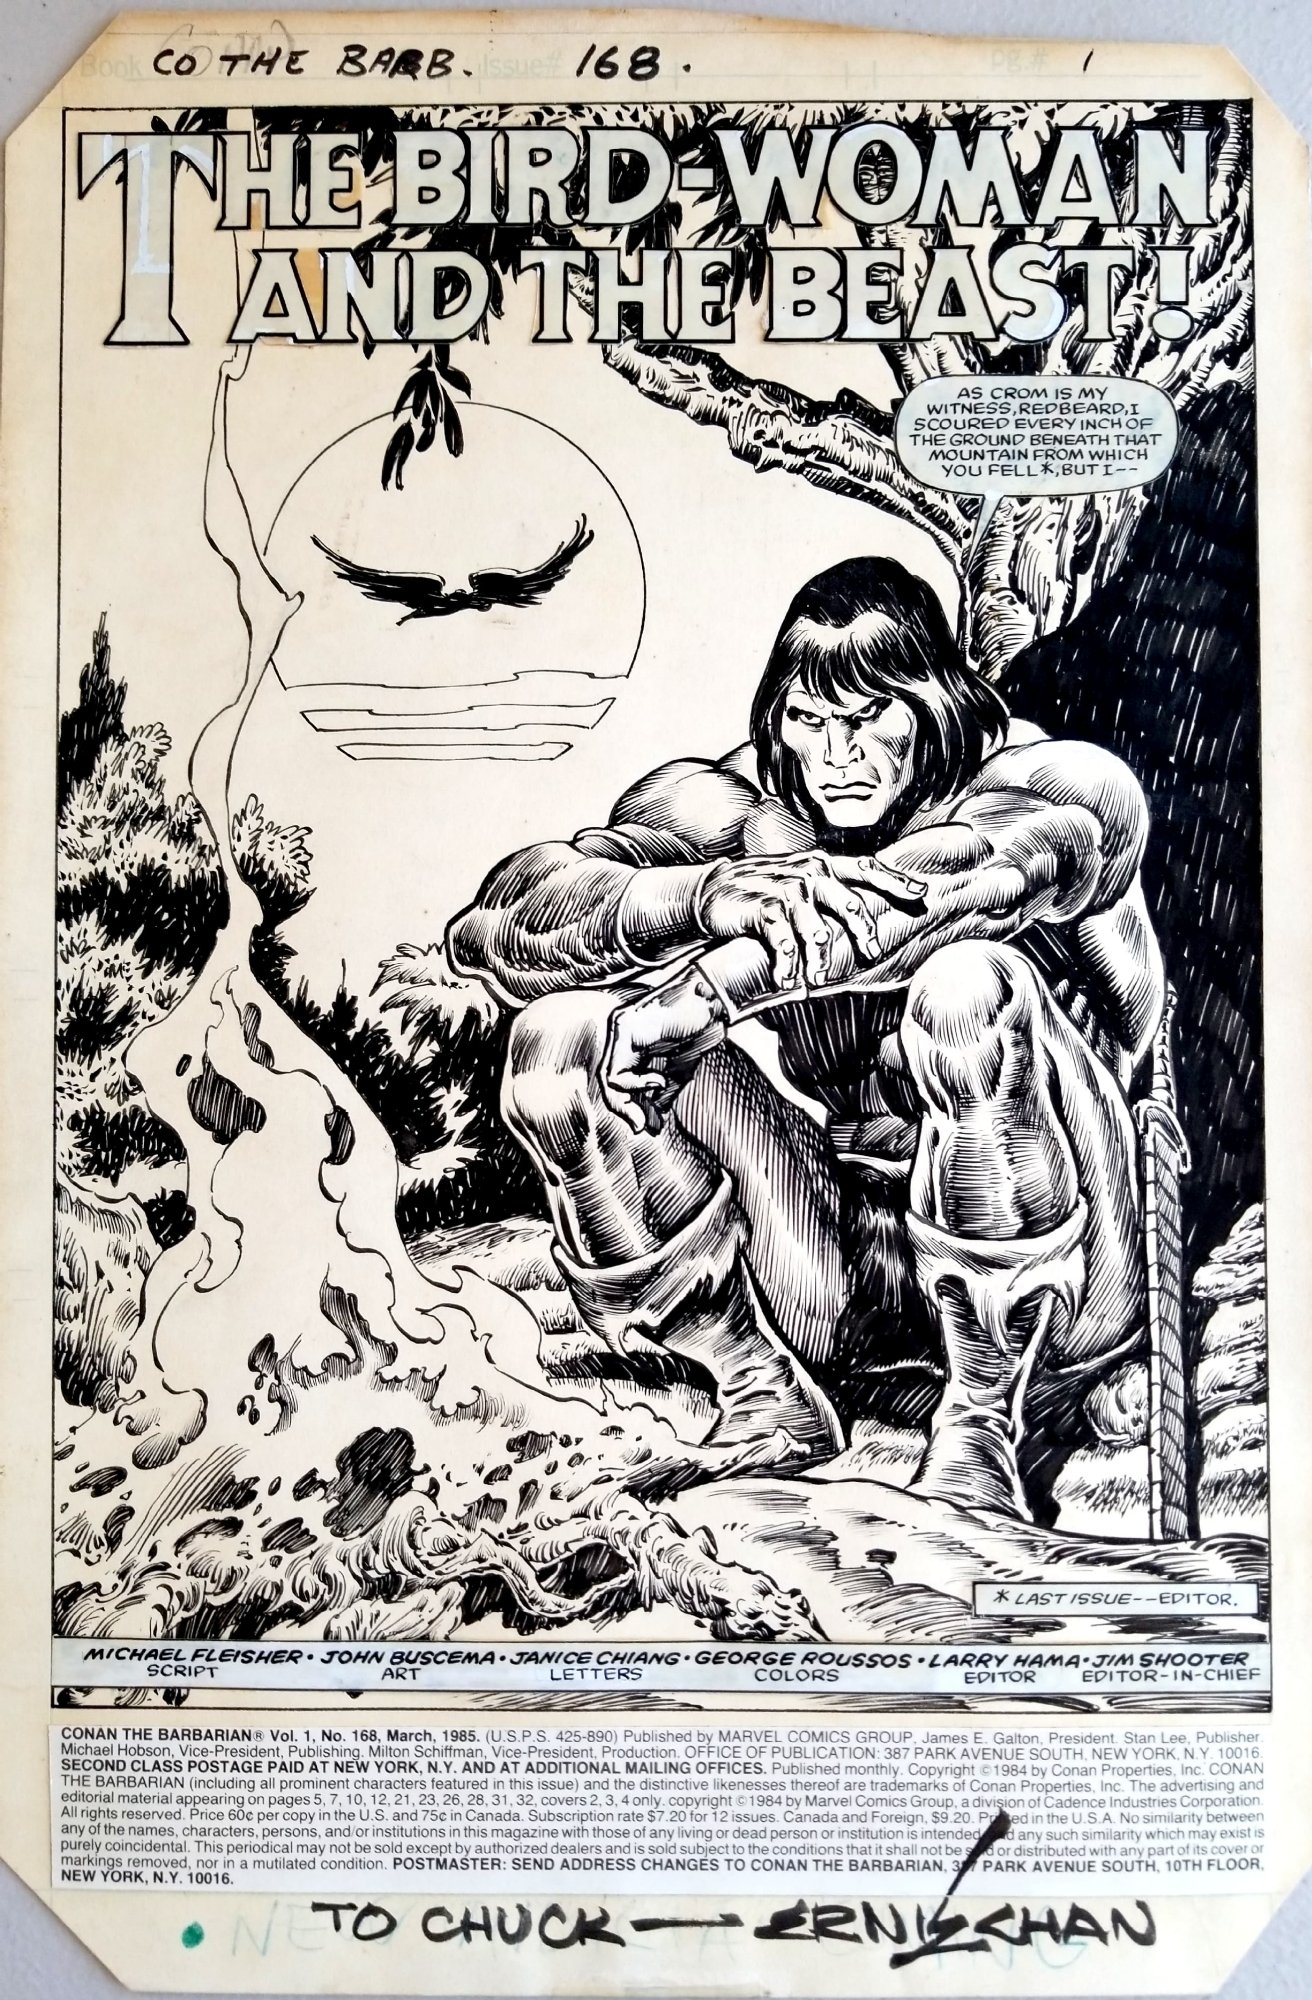 Buscema: Jorge is a stand-up guy